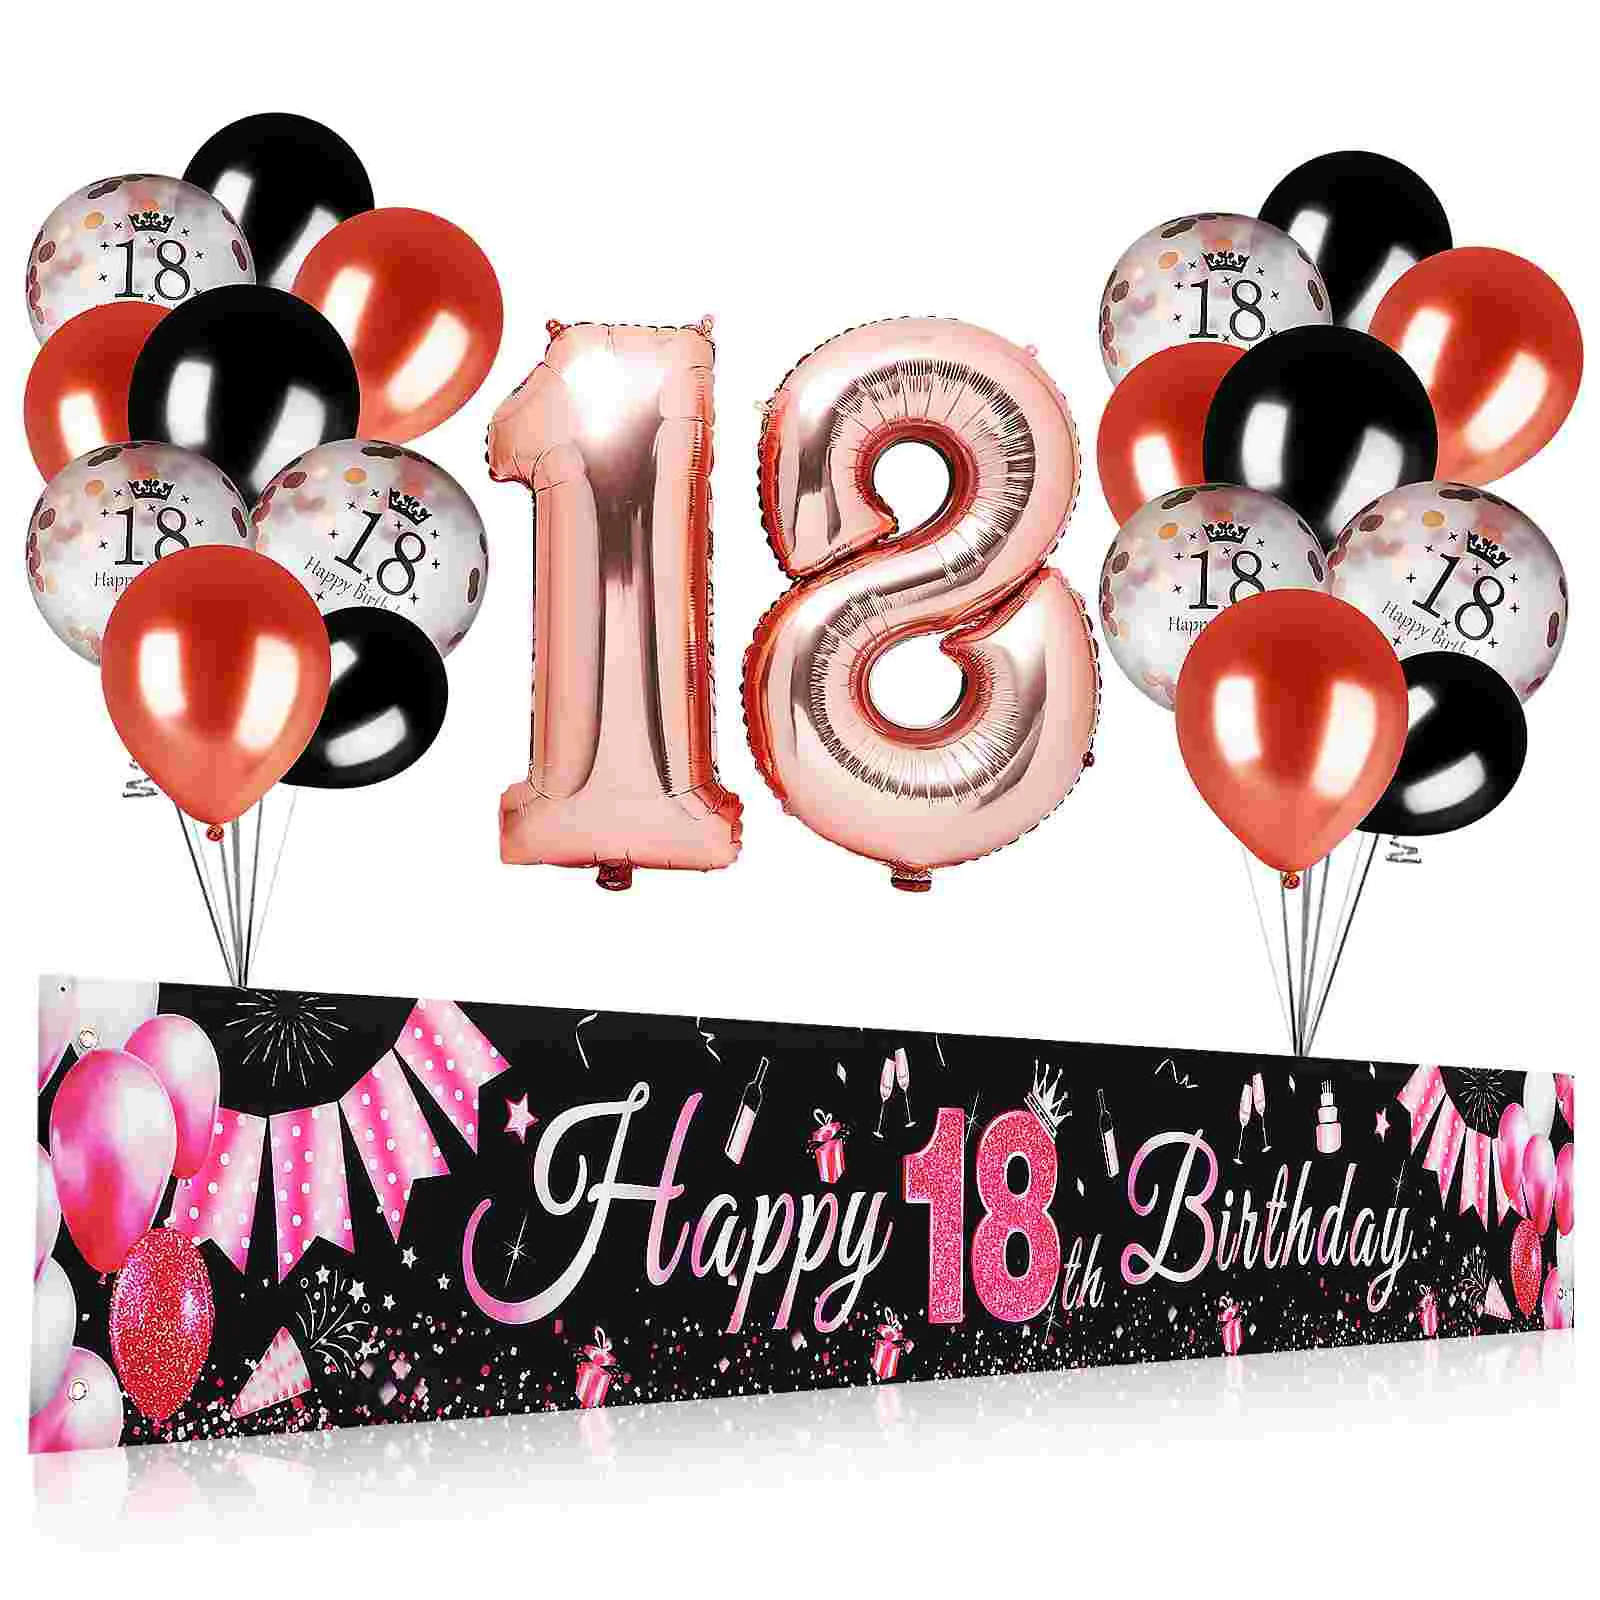 

Birthday Backdrop Party Decor Ornaments Decorations Kit Balloons Banner Prop Hanging Bag